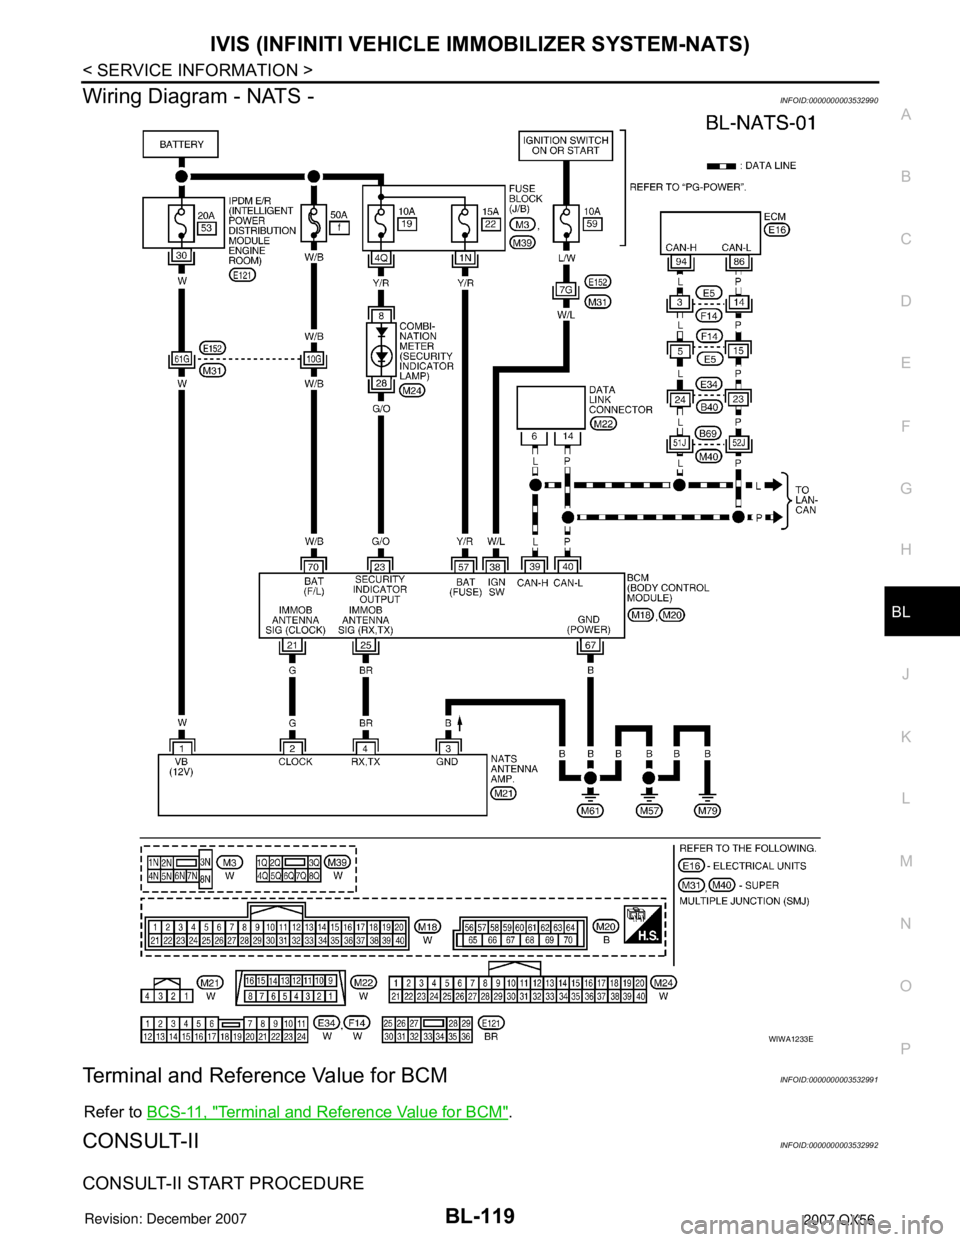 INFINITI QX56 2007  Factory Service Manual IVIS (INFINITI VEHICLE IMMOBILIZER SYSTEM-NATS)
BL-119
< SERVICE INFORMATION >
C
D
E
F
G
H
J
K
L
MA
B
BL
N
O
P
Wiring Diagram - NATS -INFOID:0000000003532990
Terminal and Reference Value for BCMINFOID